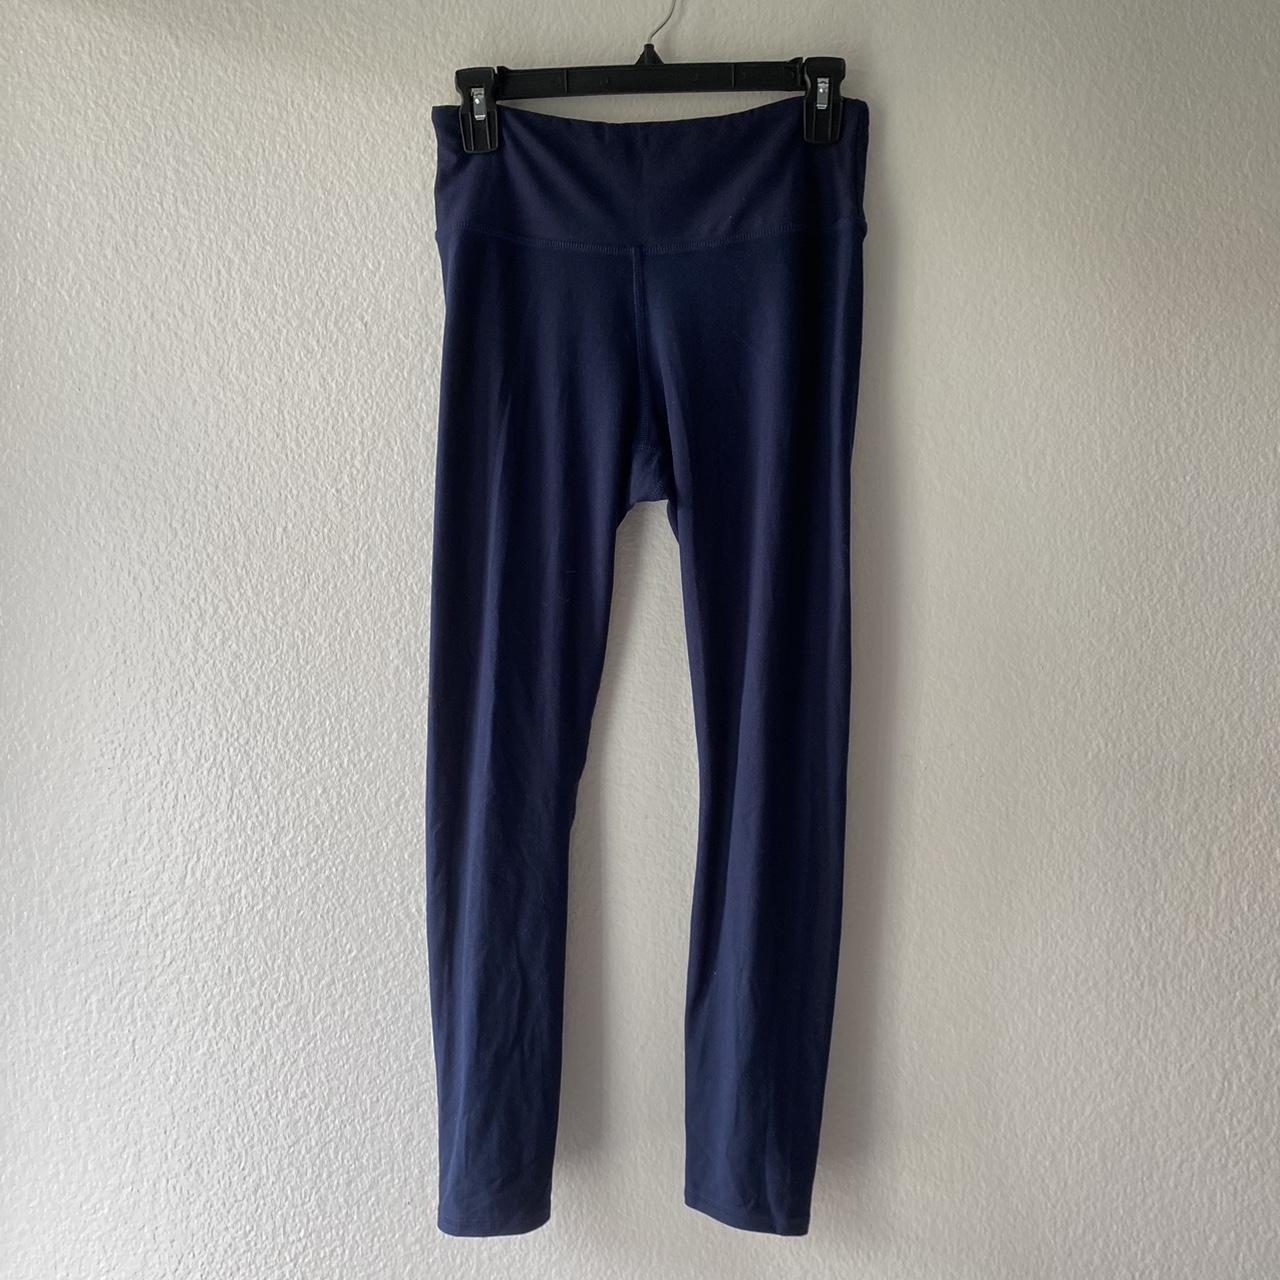 Maurices leggings Great condition. Good stretch Size - Depop